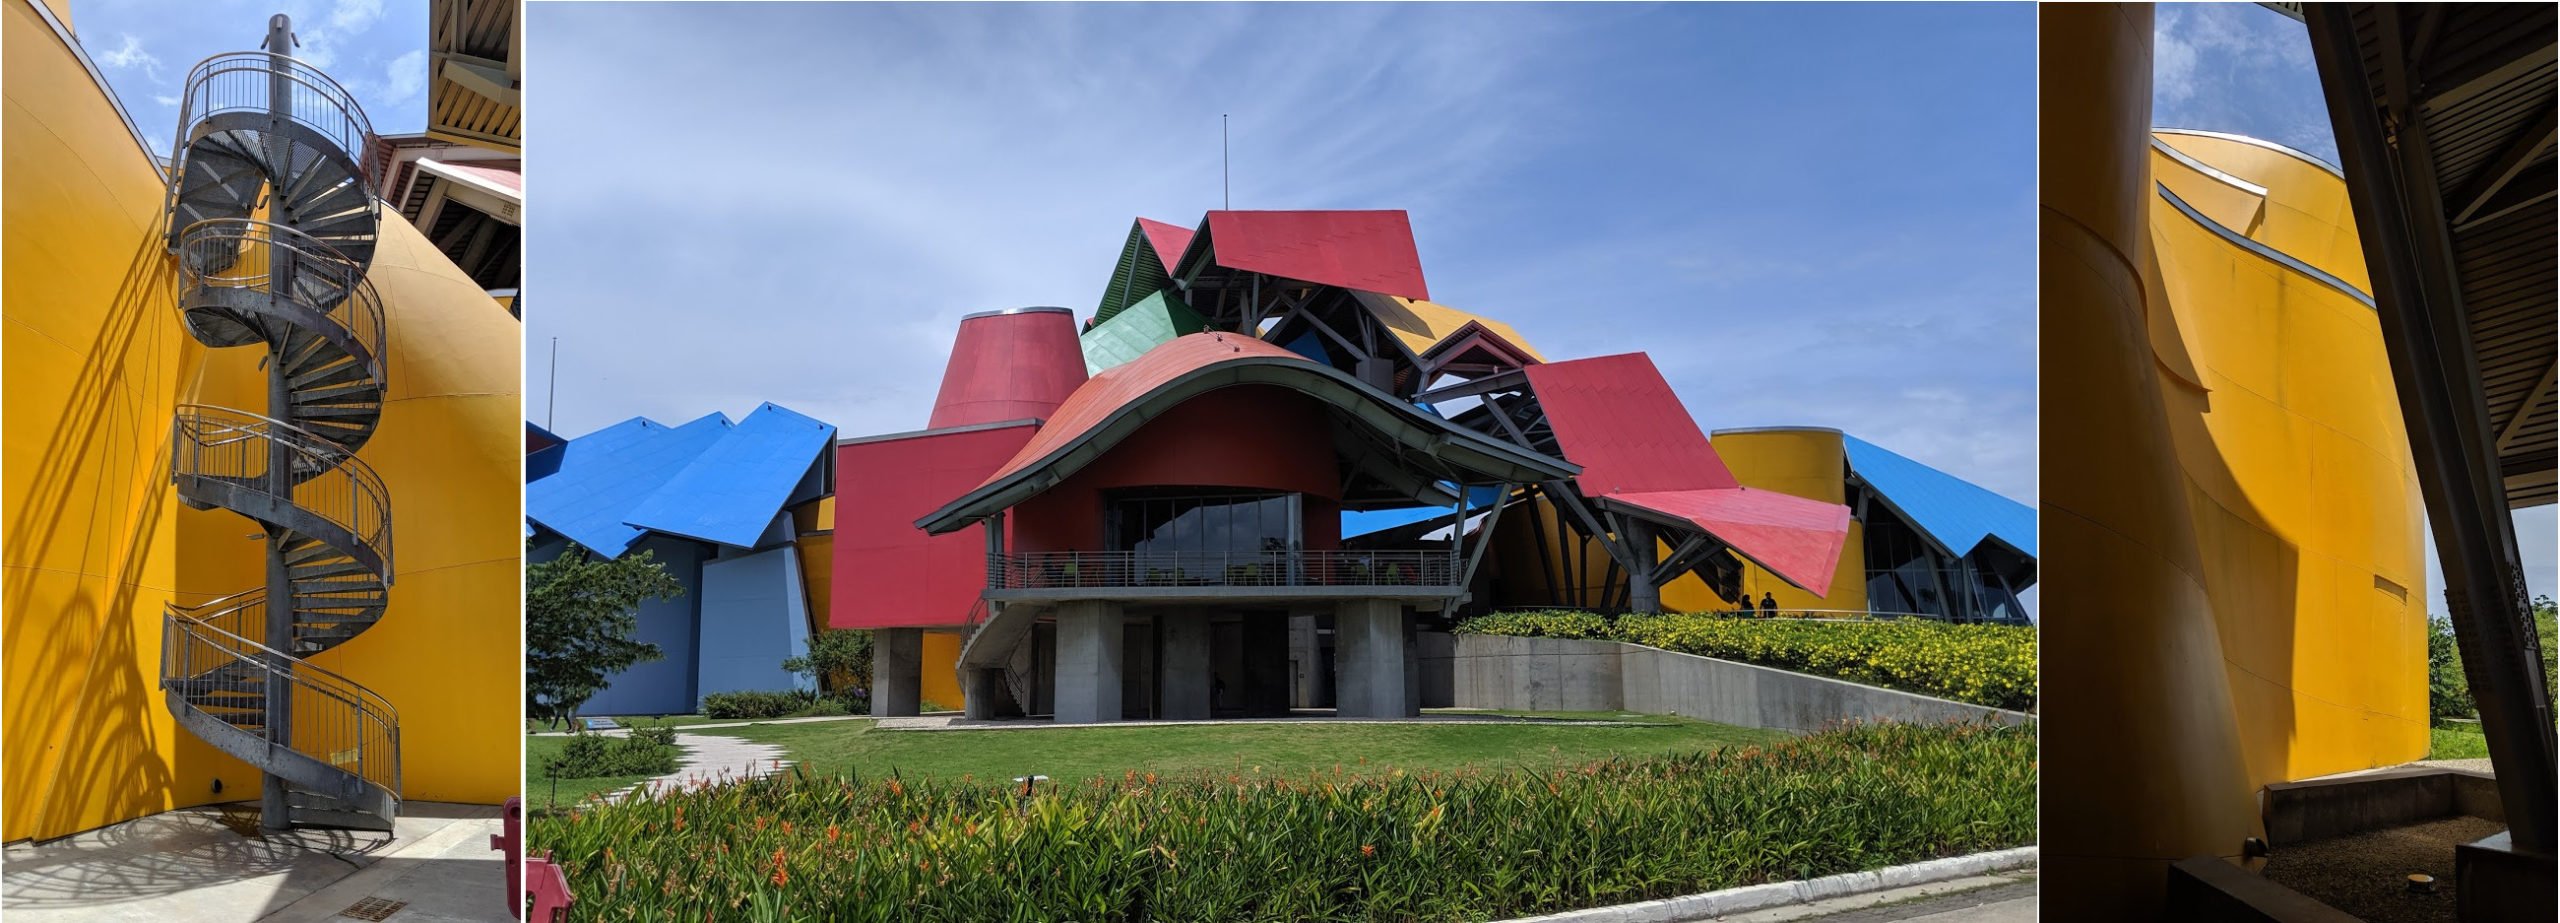 Biomuseo | Museum of Biodiversity at Panama designed by Frank Gehry (Photos: invidis)